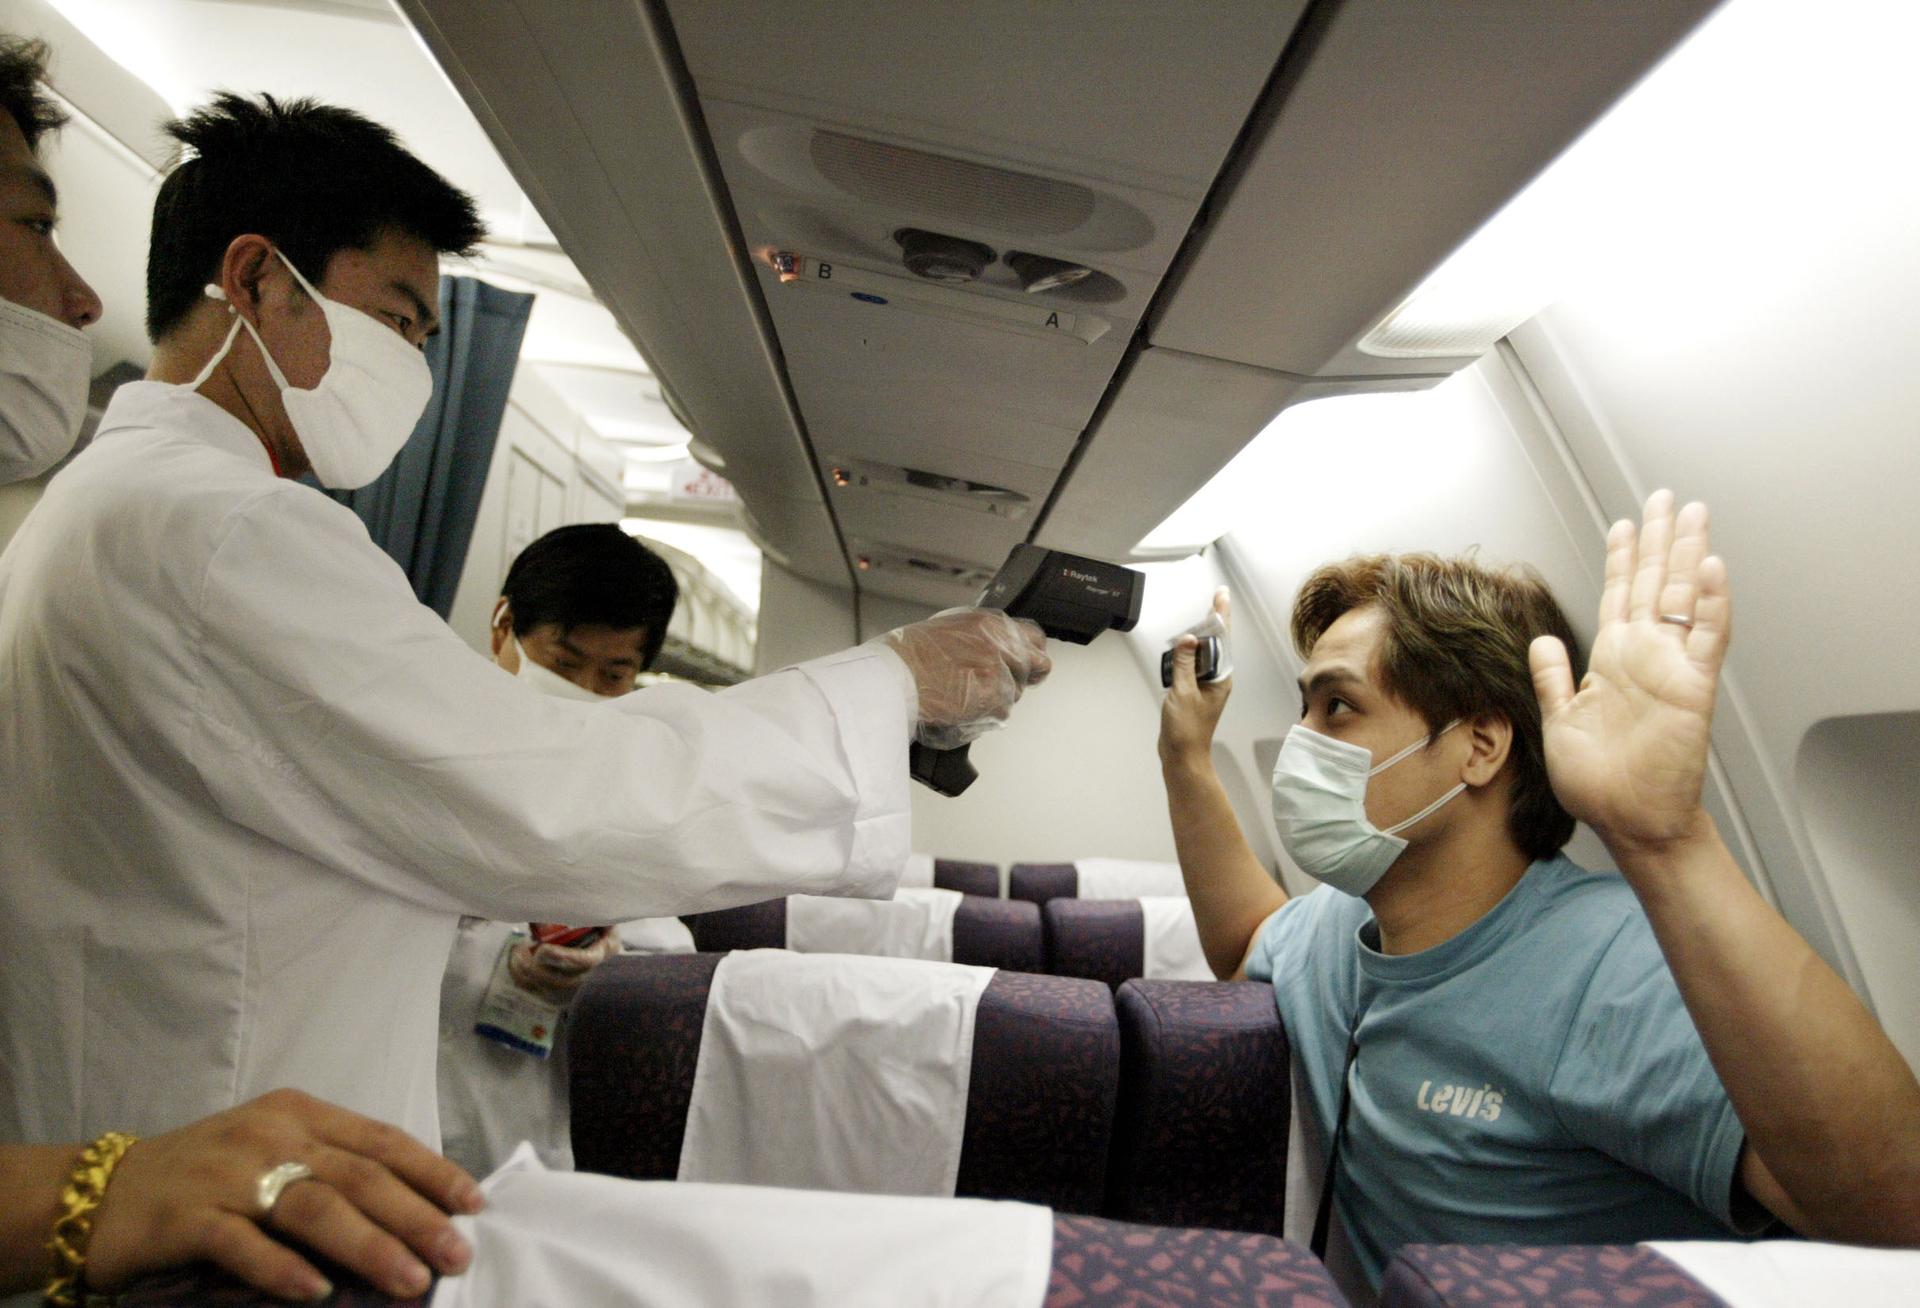 A Chinese doctor checks the temperature of a passenger on a flight from Hong Kong to Shanghai during the SARS outbreak in 2003. There are now fears that Ebola could spread via travel from West Africa to the rest of the world.